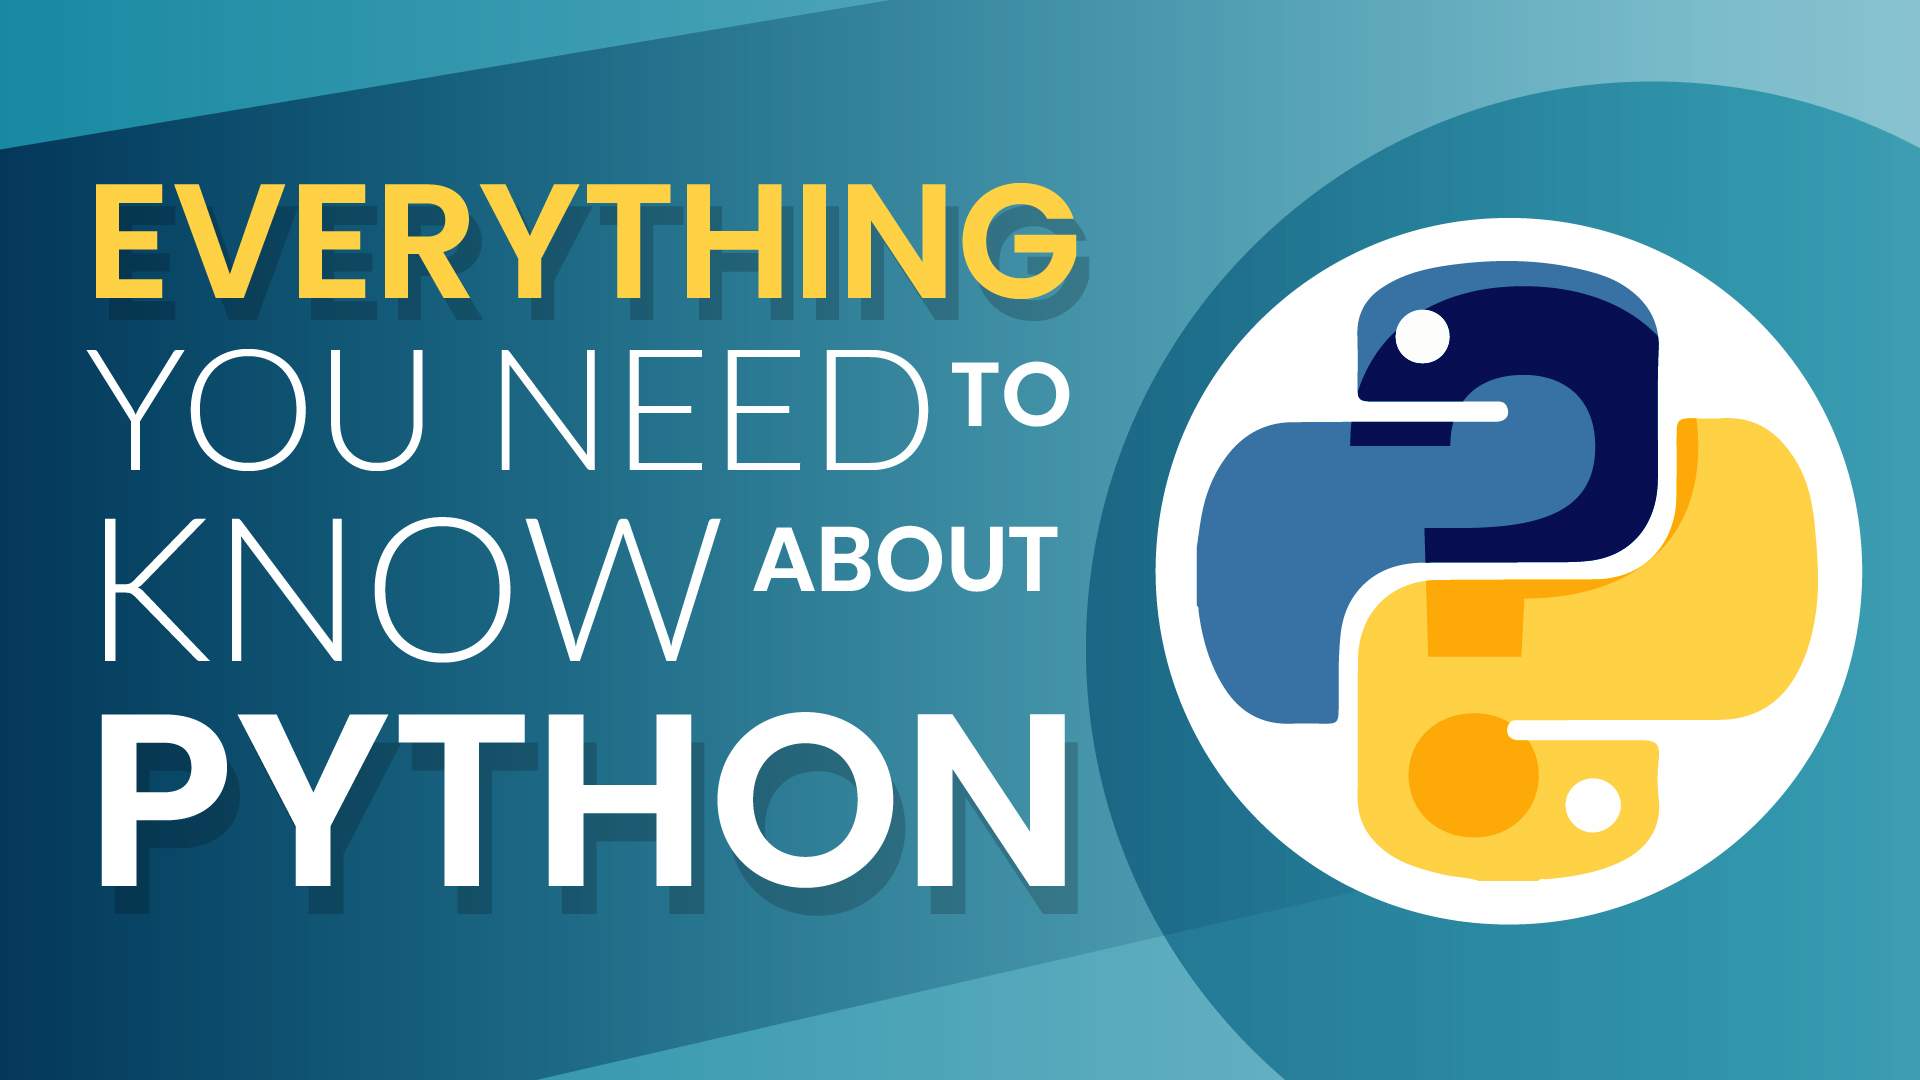 Exploring the Vast Applications and Uses of Python